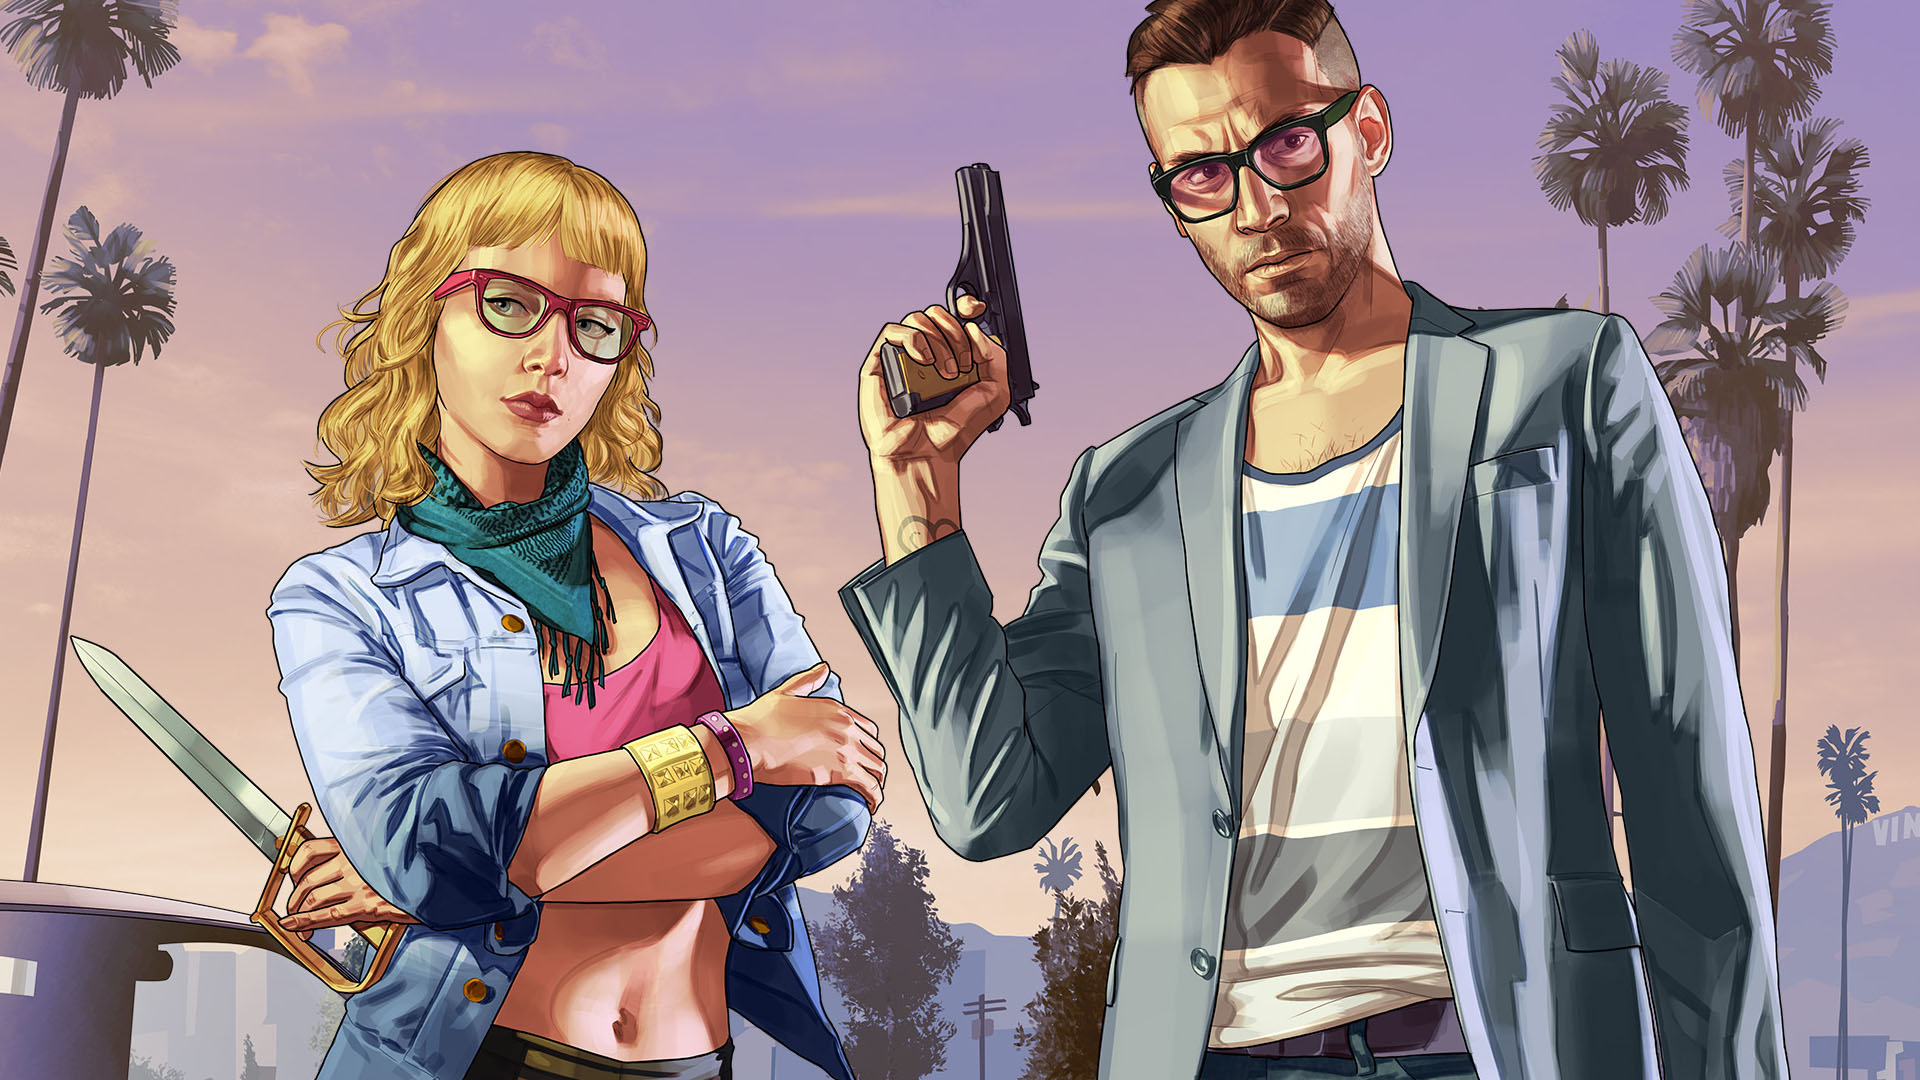 Grand Theft Auto 6 will set creative benchmarks for the series, says Take-Two